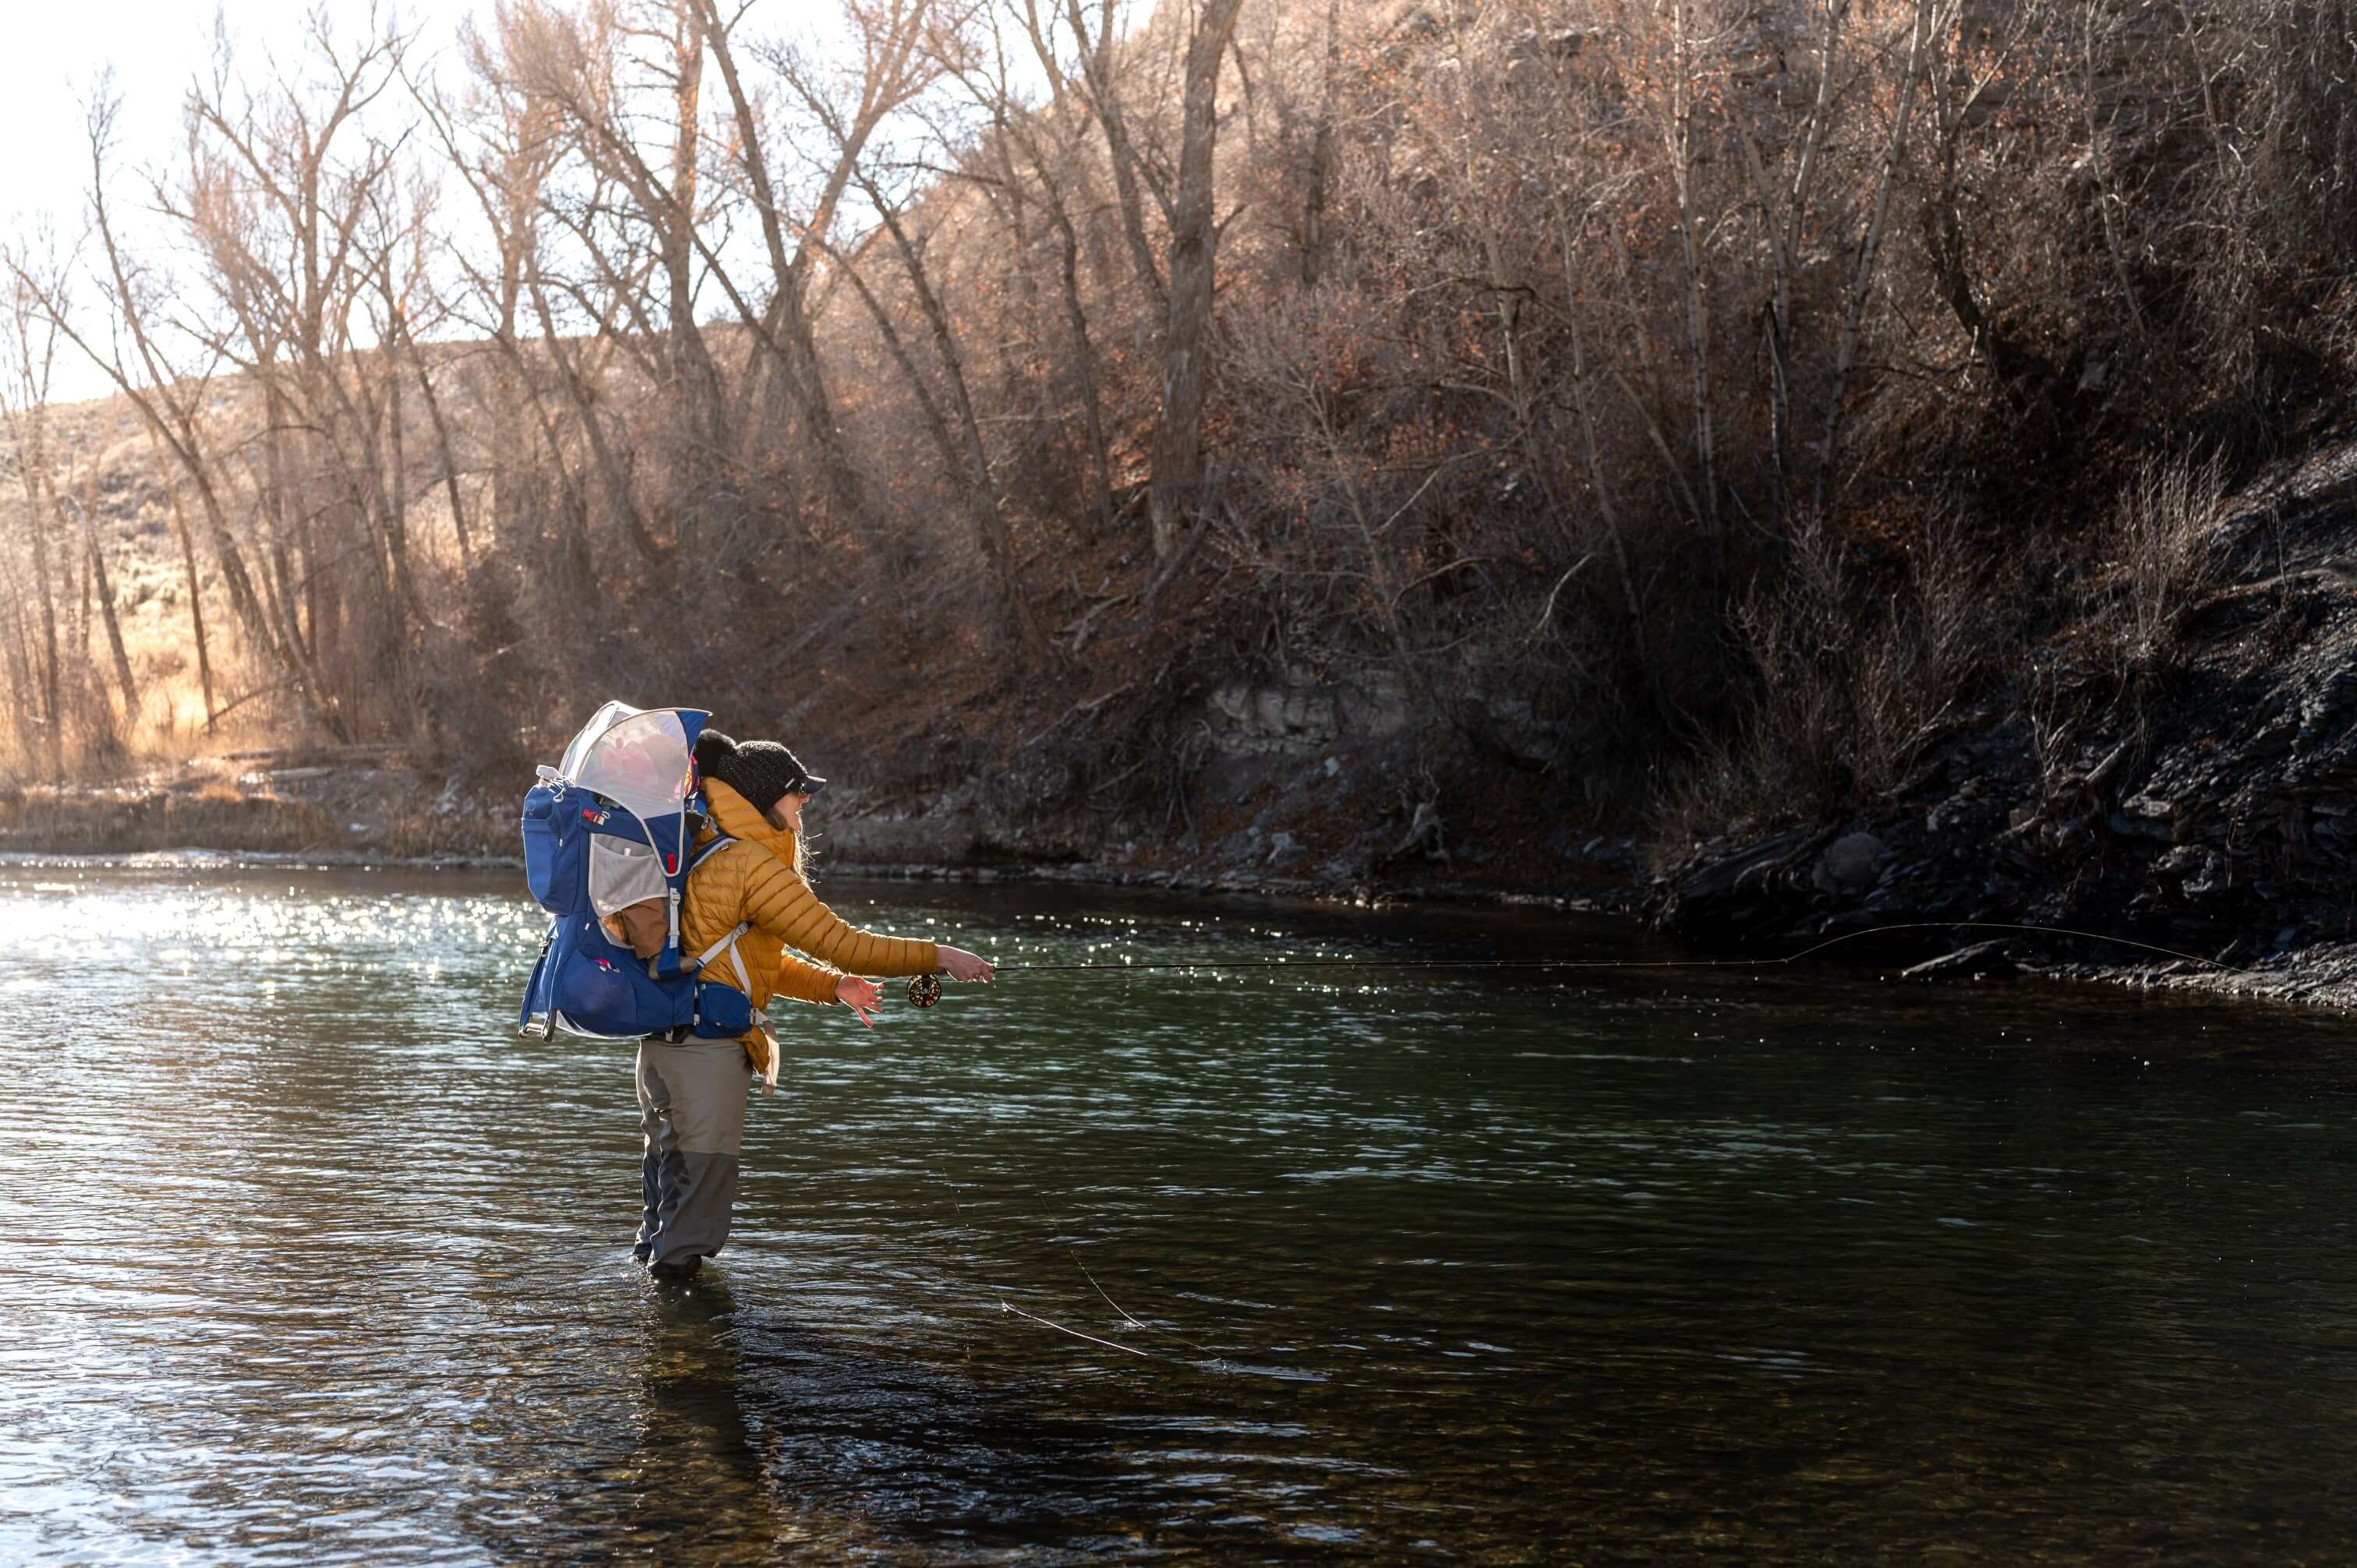 fly fishing in the winter, fly fishing with a baby